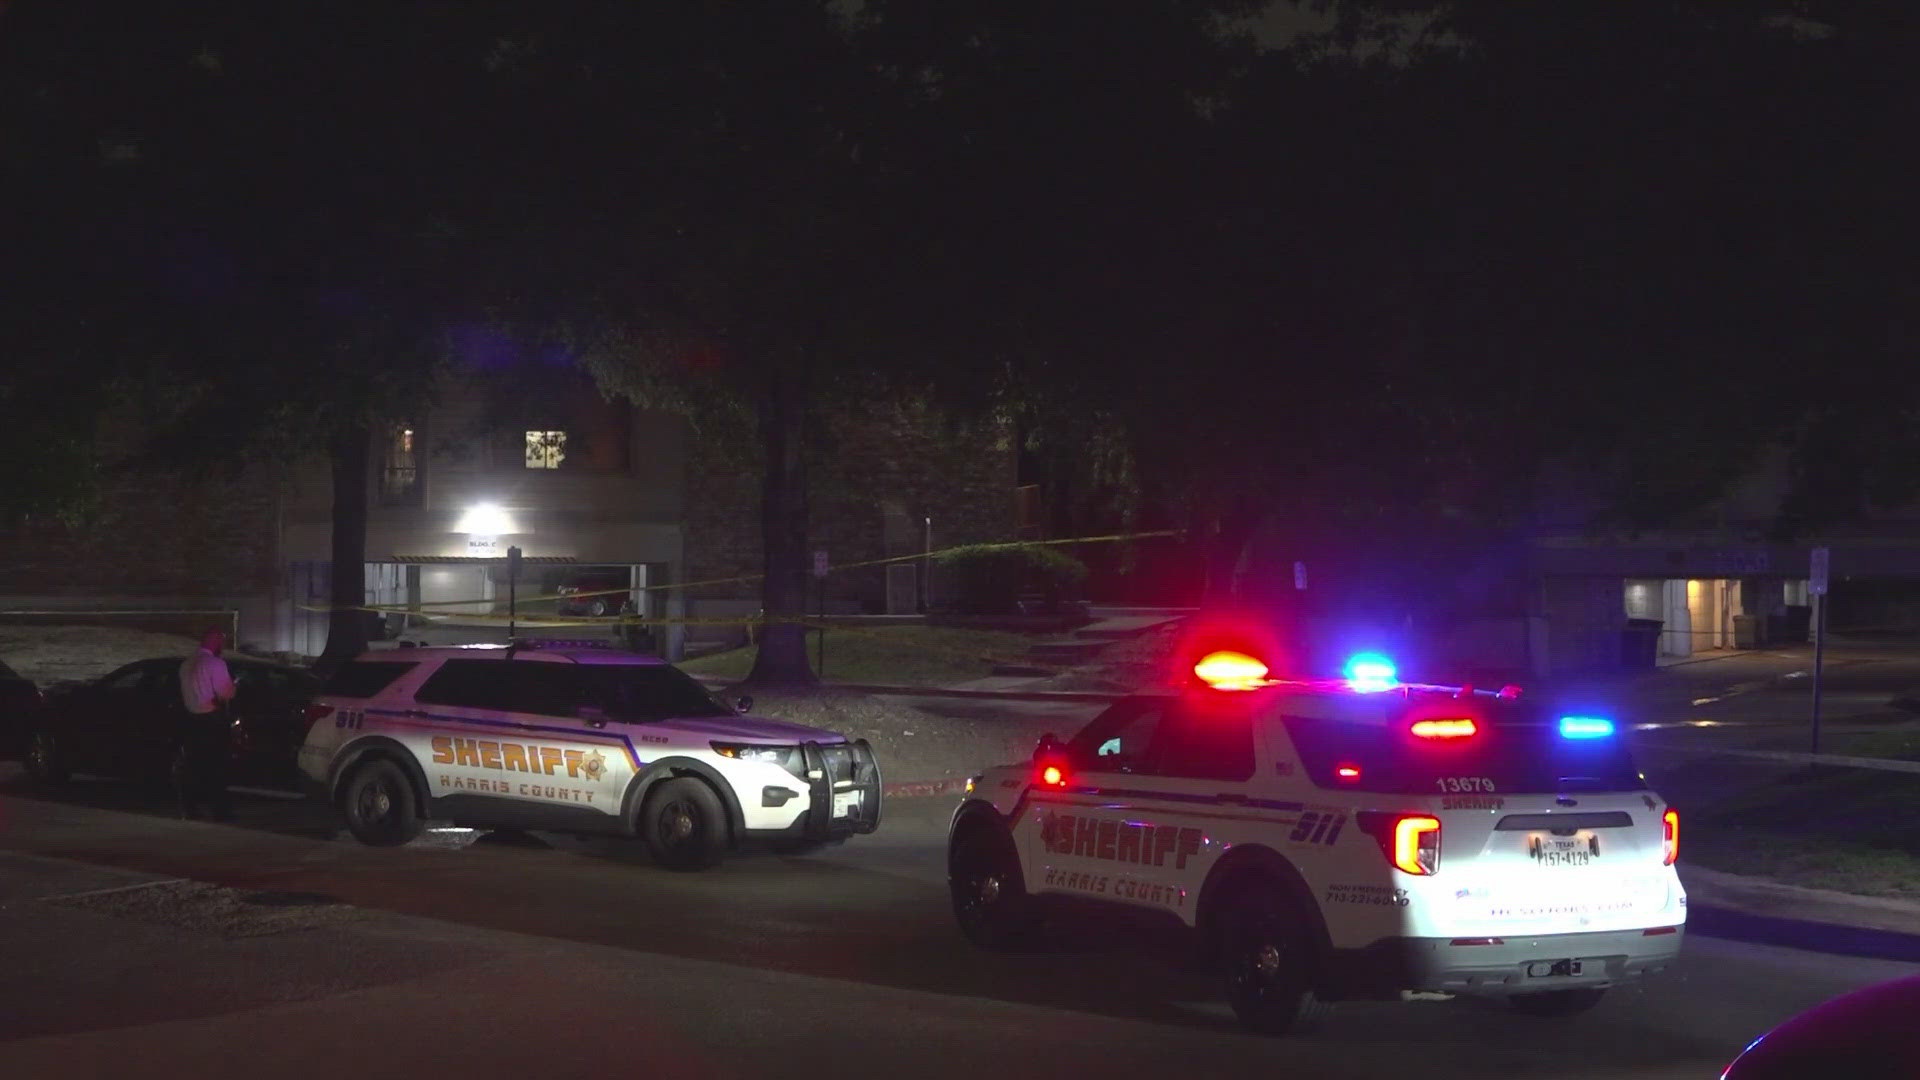 A teen was killed and another hurt in a shooting outside an apartment complex, according to the Harris County Sheriff's Office.